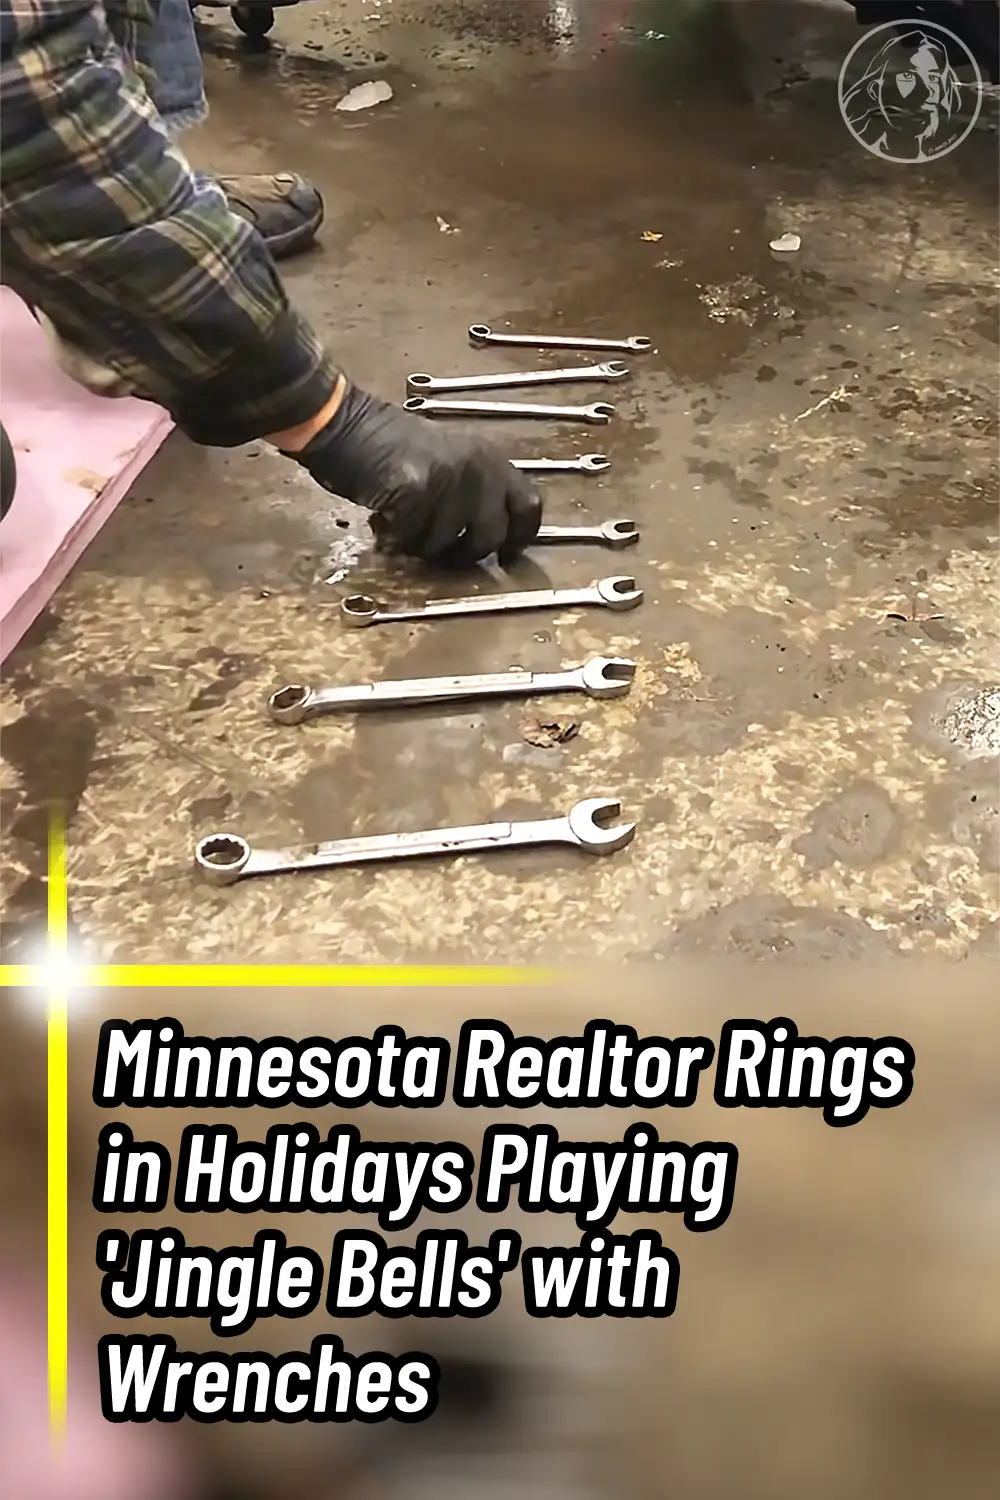 Minnesota Realtor Rings in Holidays Playing \'Jingle Bells\' with Wrenches